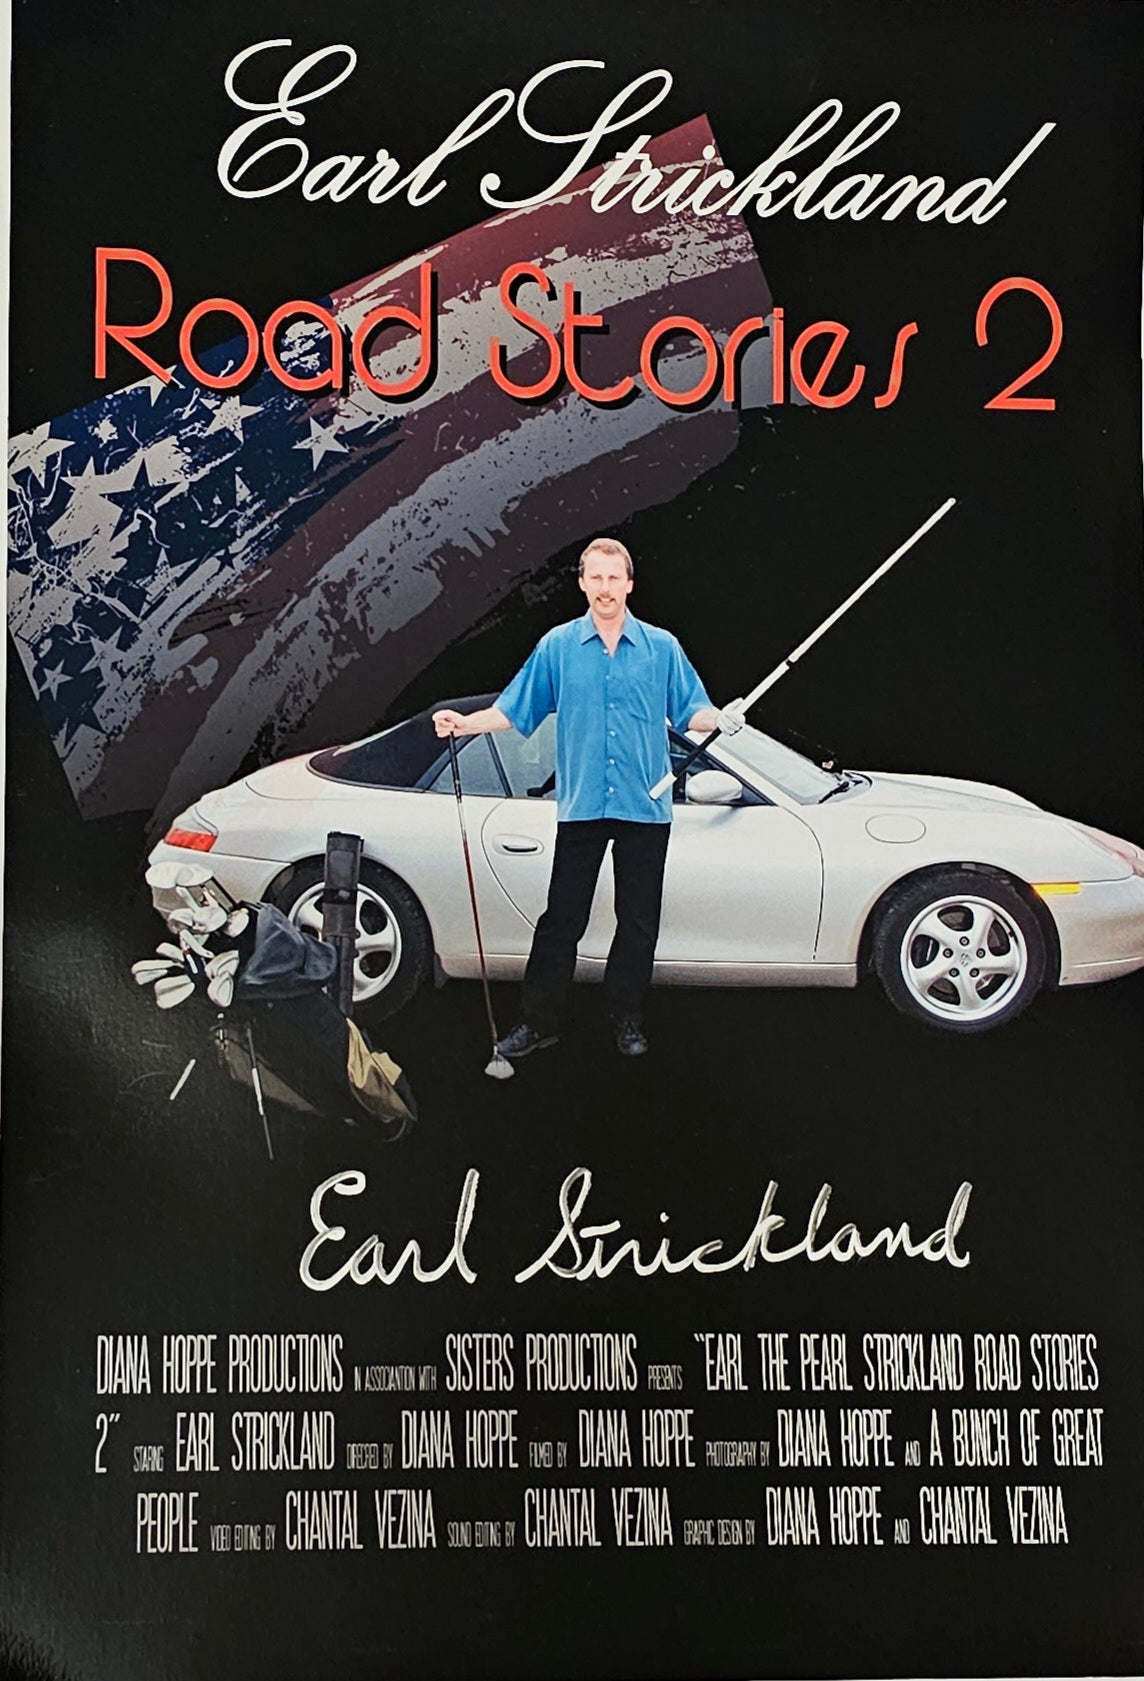 Autographed Road Stories 2 Poster 12x18